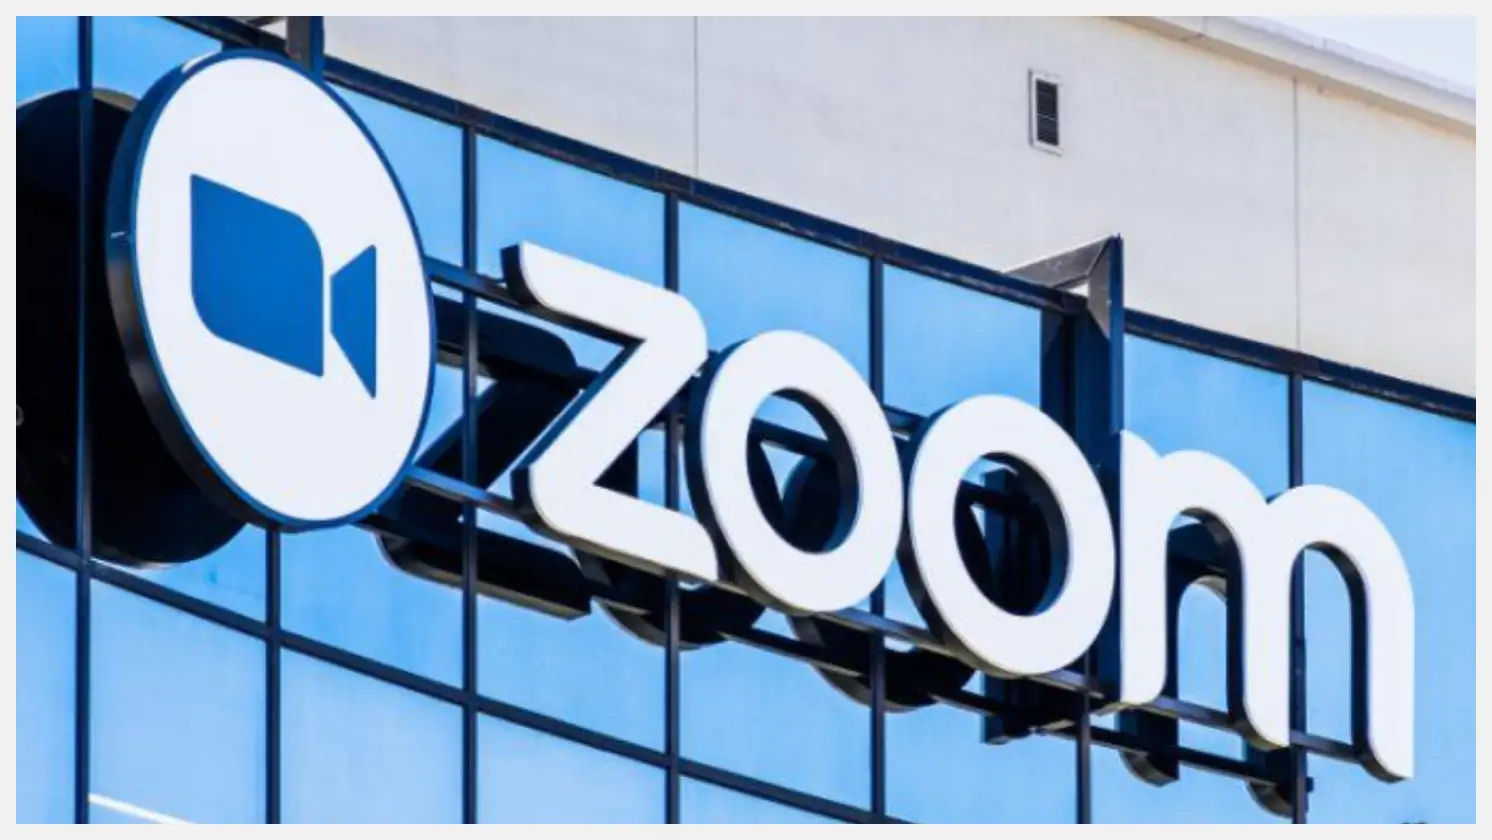 Photograph of Zoom logo on the Zoom office building